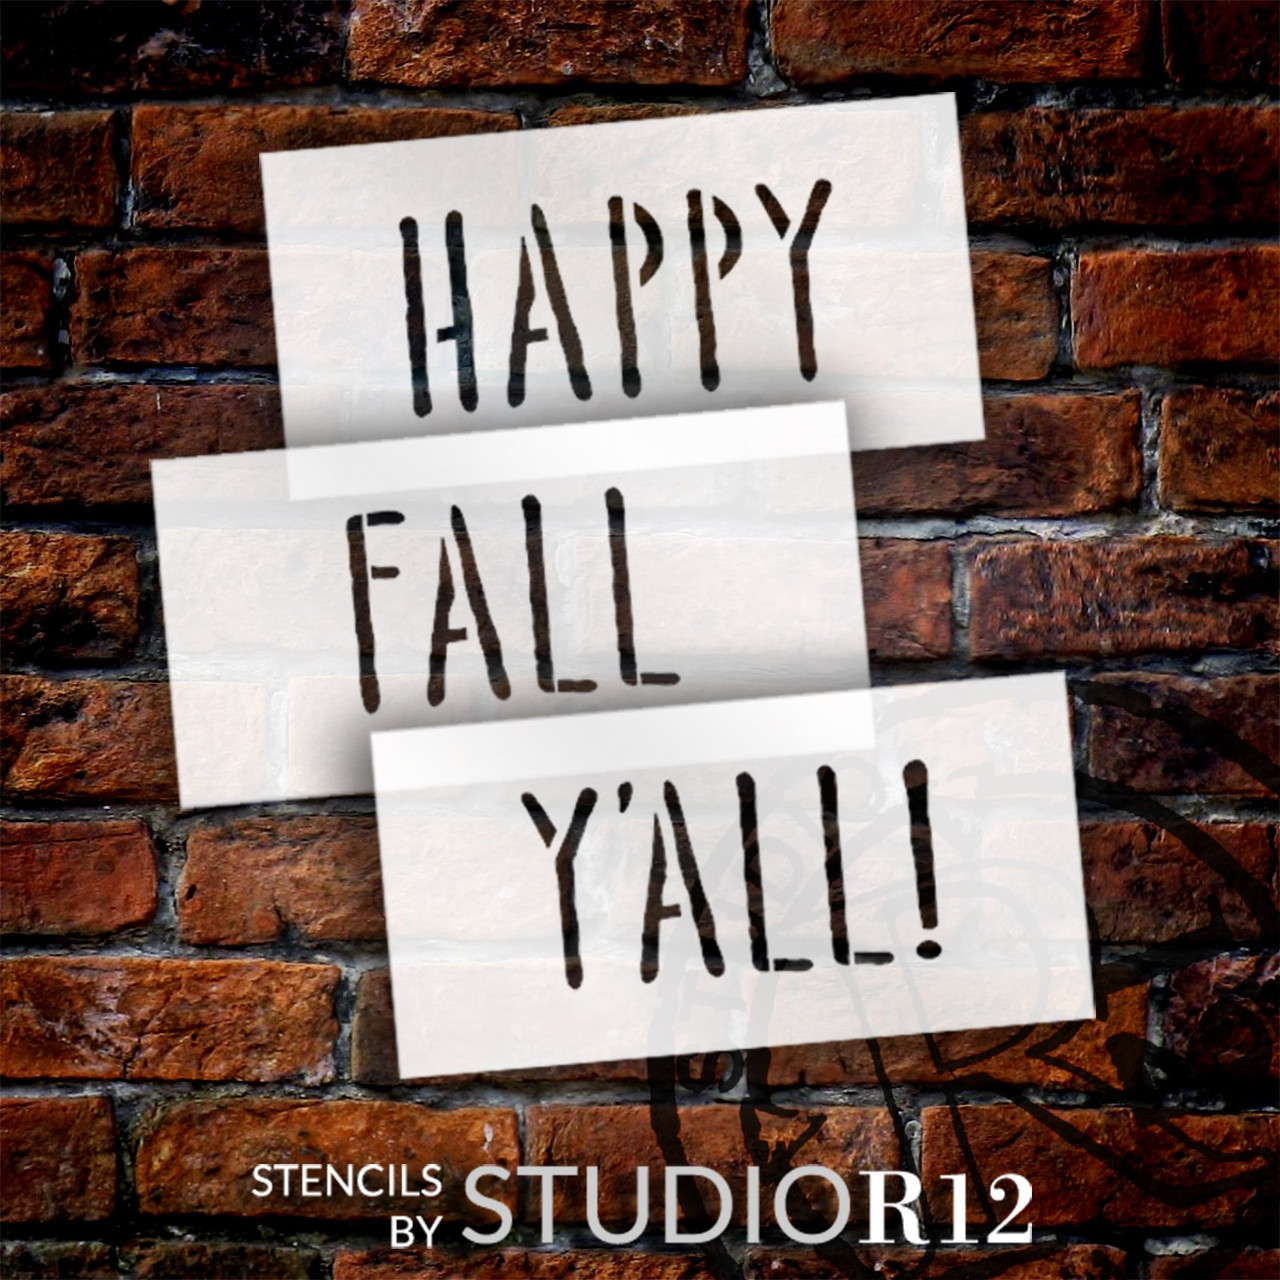 Happy Fall Y'all Stencils for Stacked Wood Blocks by StudioR12 - Select Size - USA Made - Seasonal DIY Autumn Mini Book Stack for Tiered Tray - STCL7097